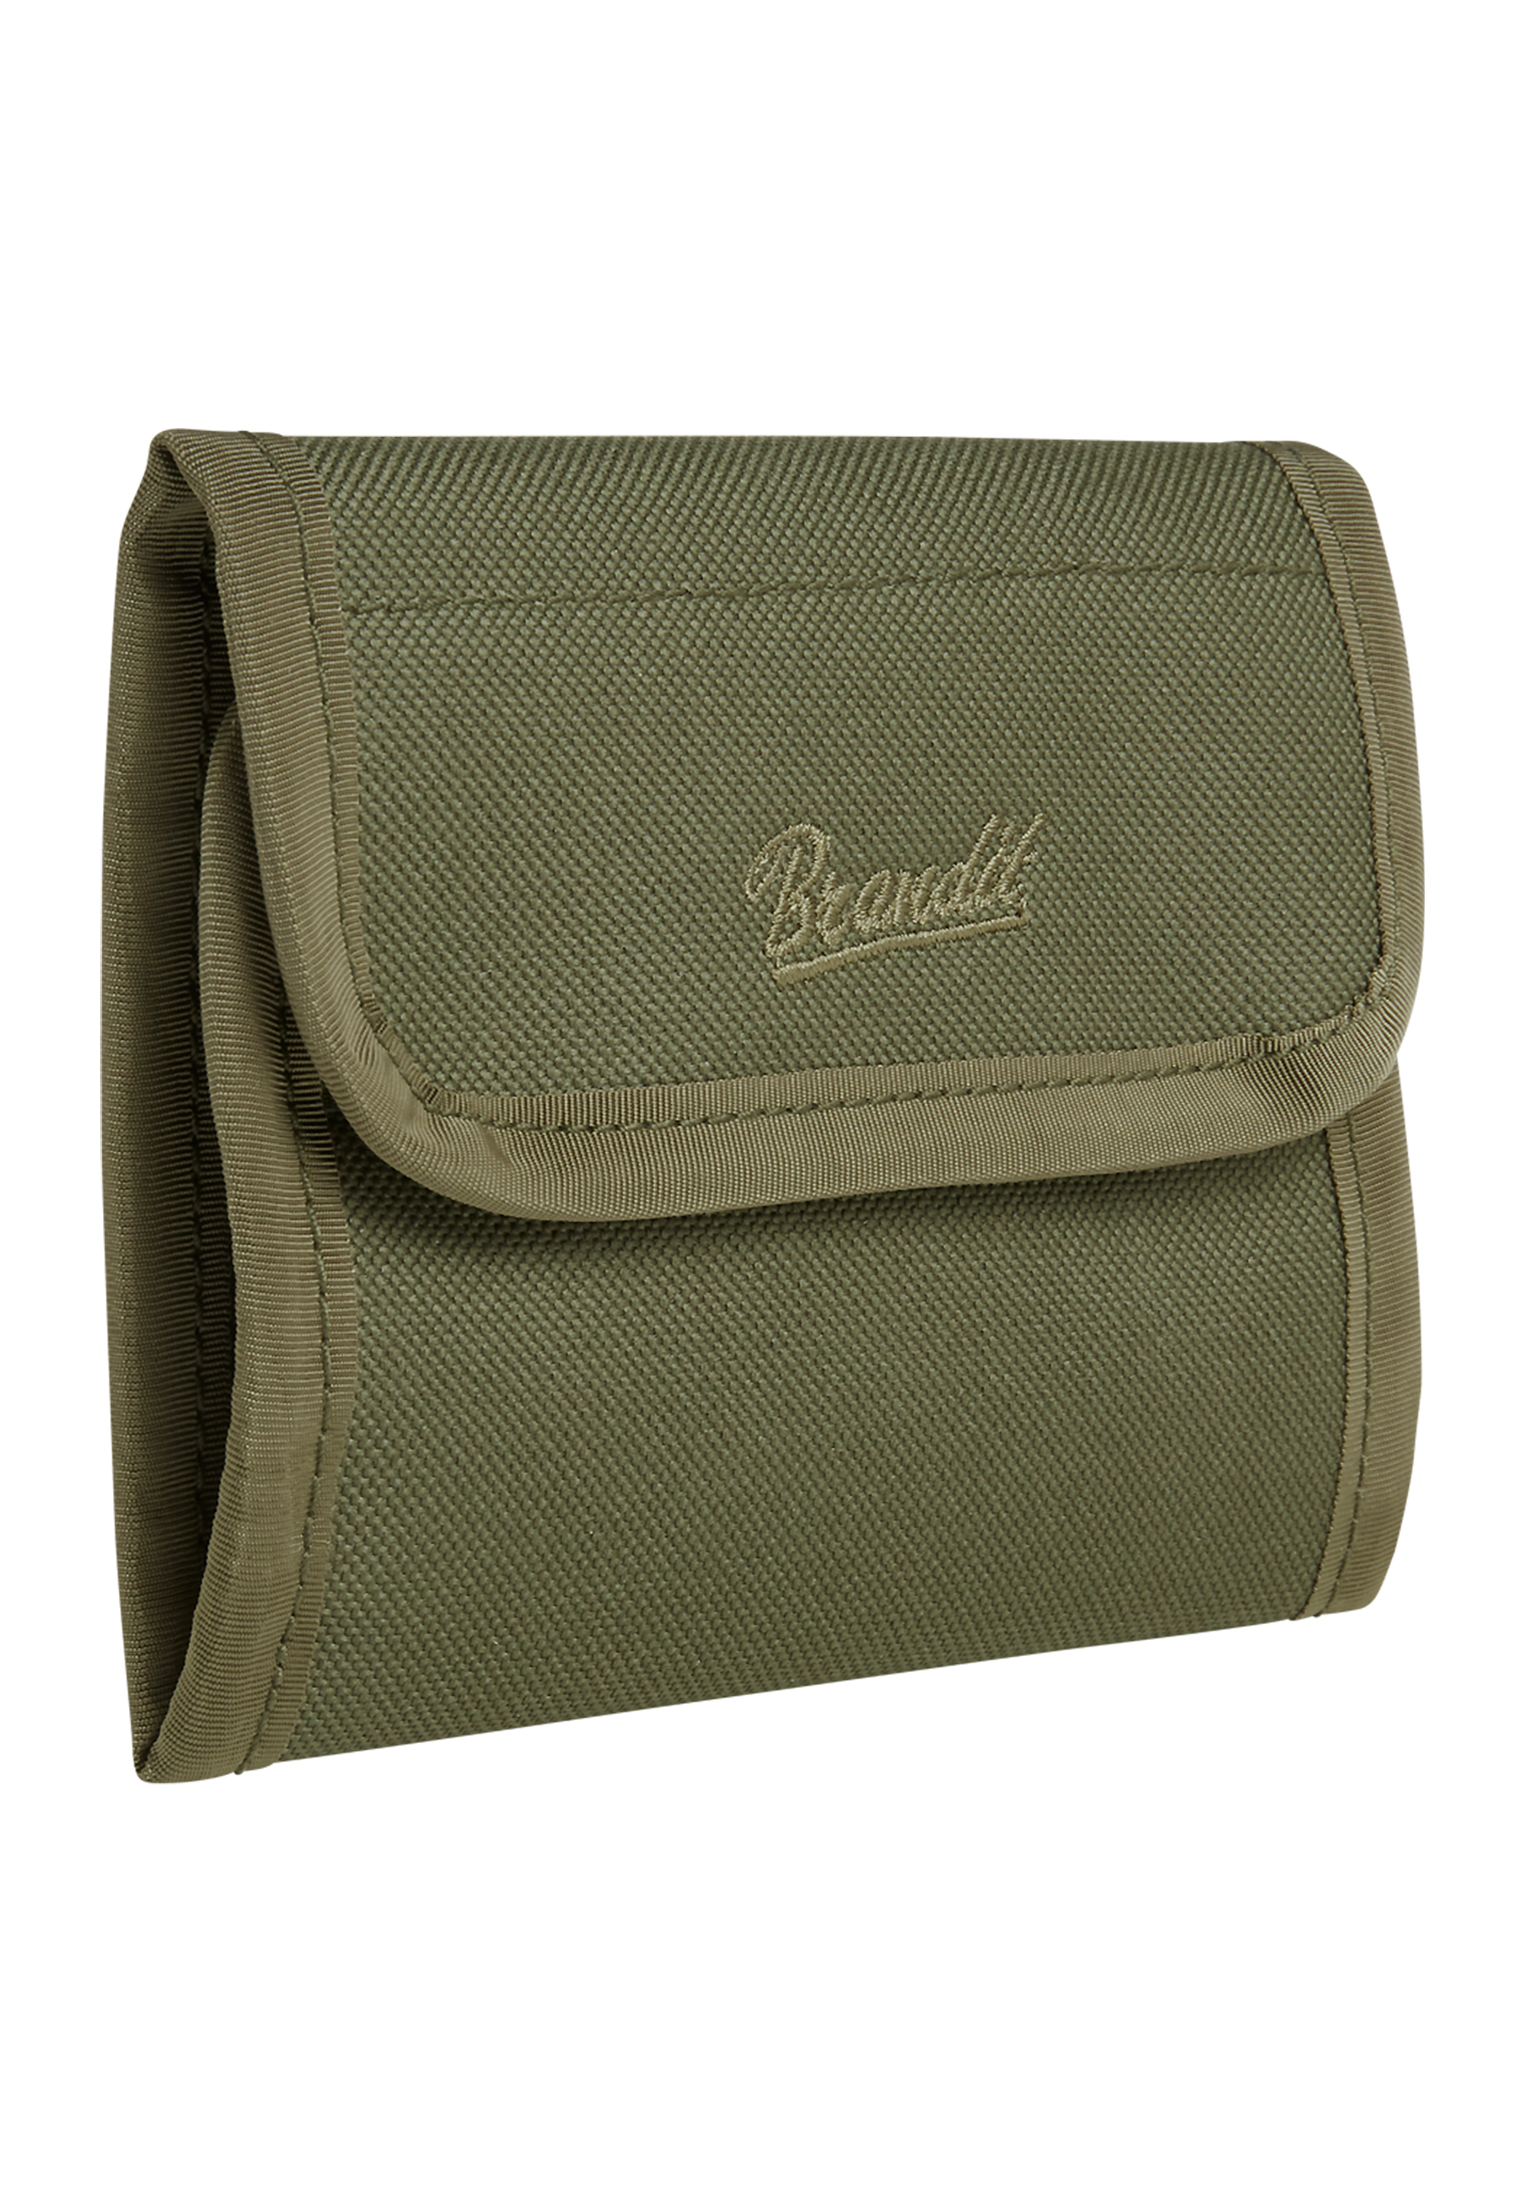 Accessoires wallet five in Farbe olive